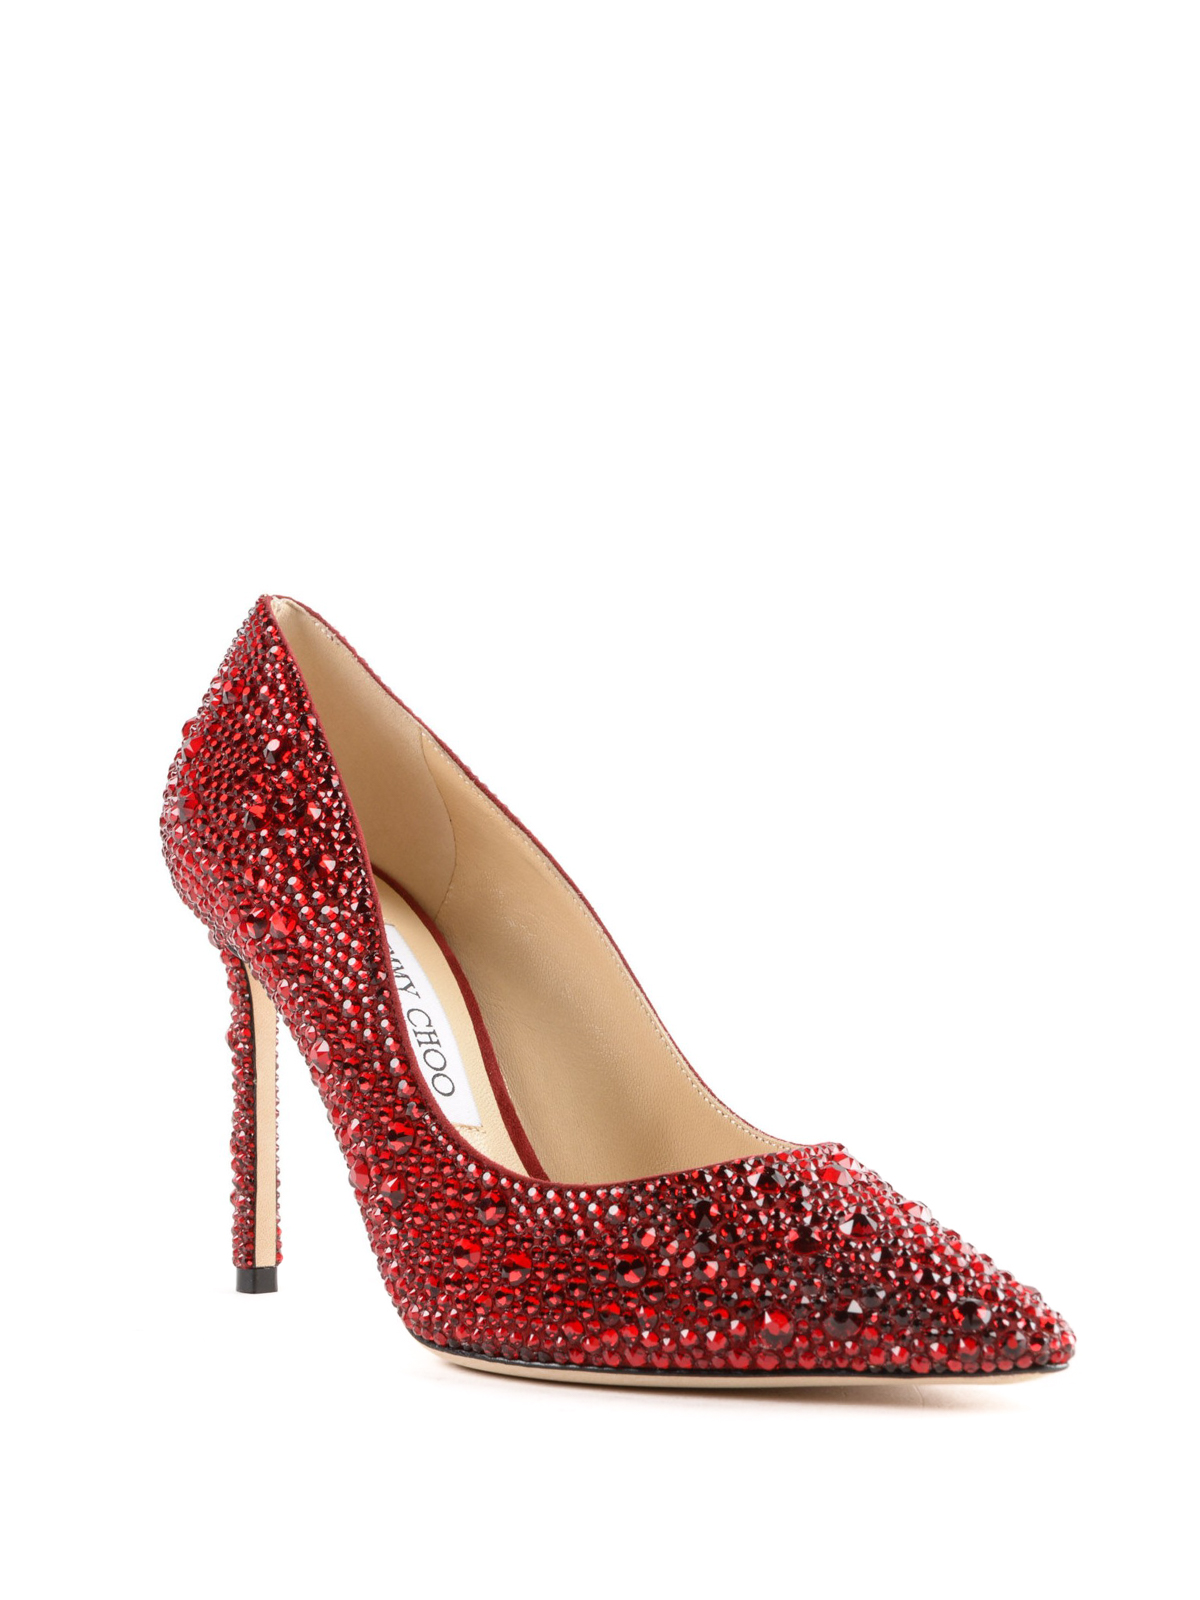 Court shoes Jimmy Choo - Romy red crystal suede pumps - ROMY100SRMRED